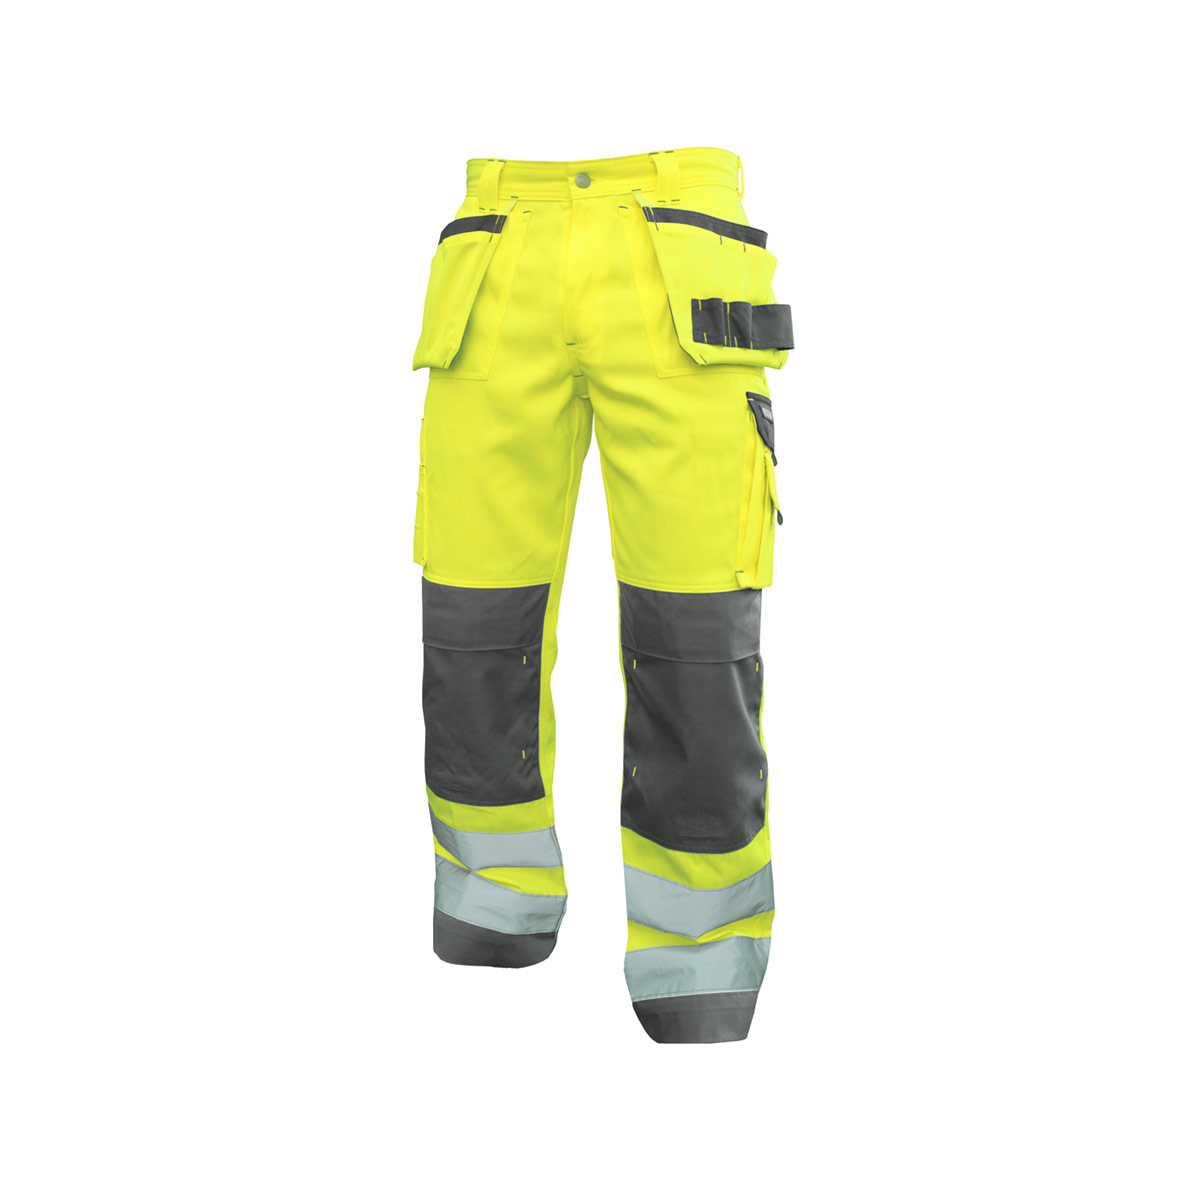 DASSY Glasgow high visibility trousers with holster pockets and knee pad pockets